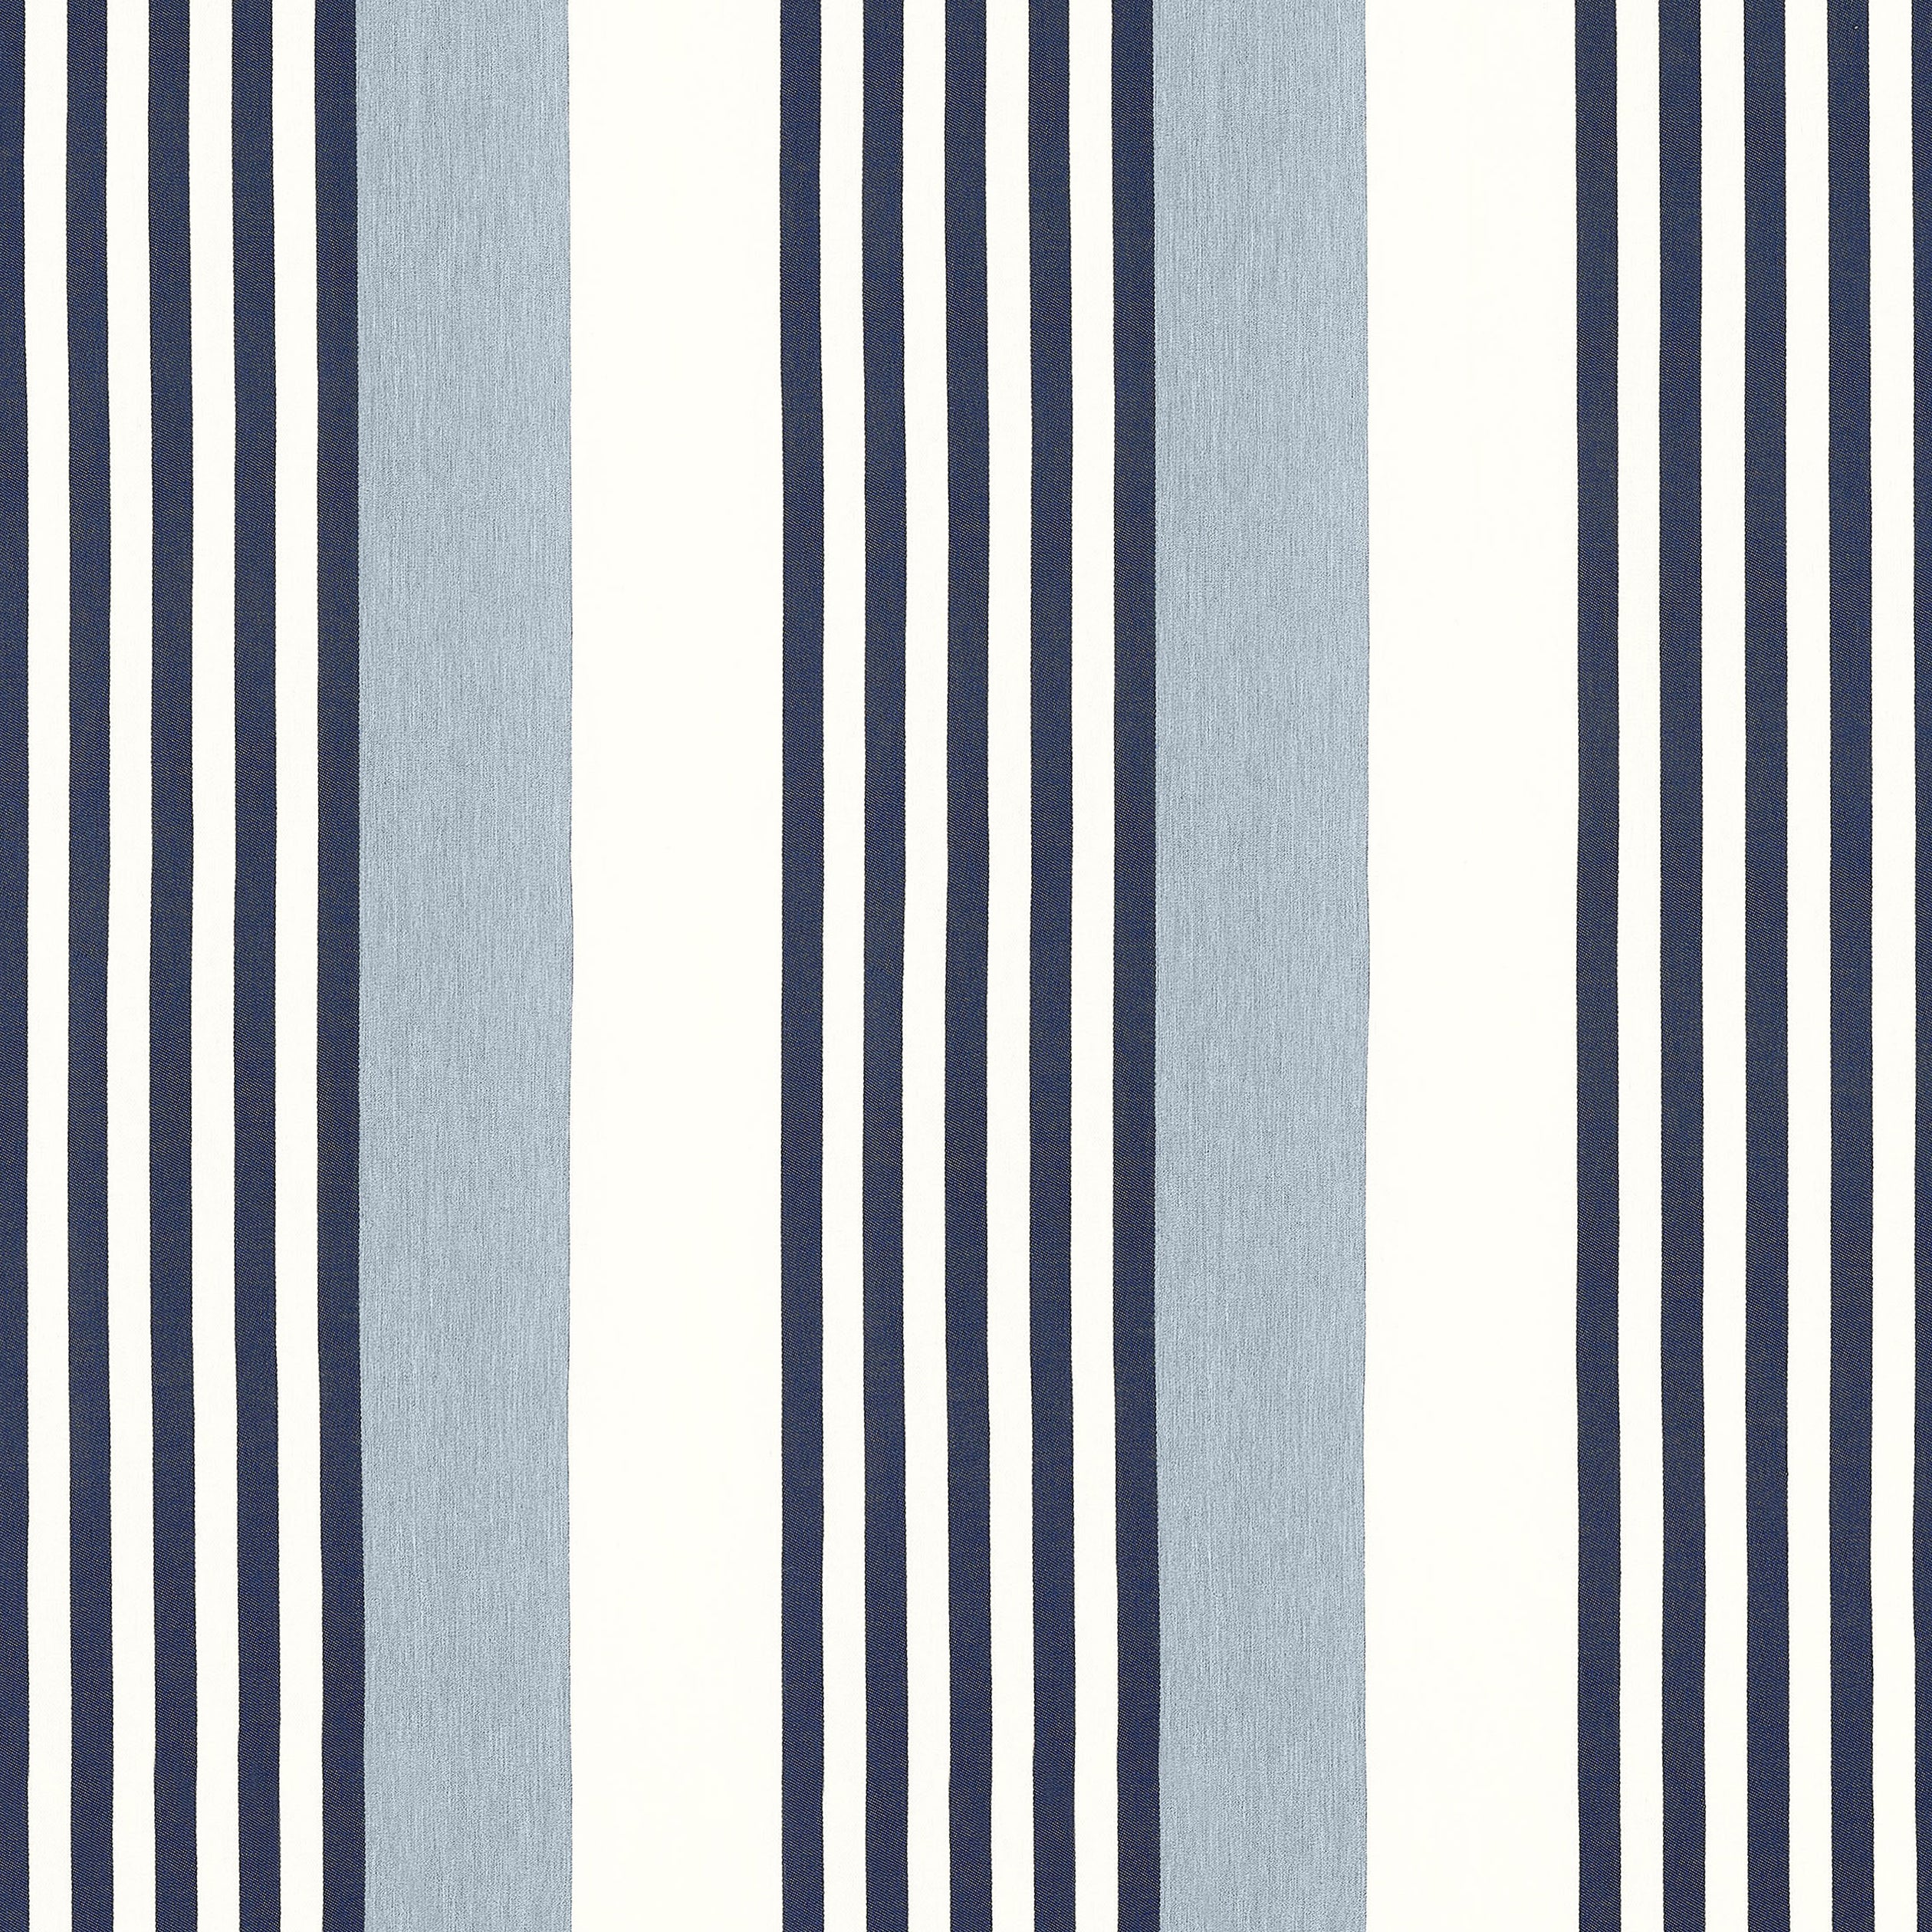 Riviera Stripe fabric in oxford blue and navy color - pattern number FWW81768 - by Thibaut in the Locale Wide Width collection